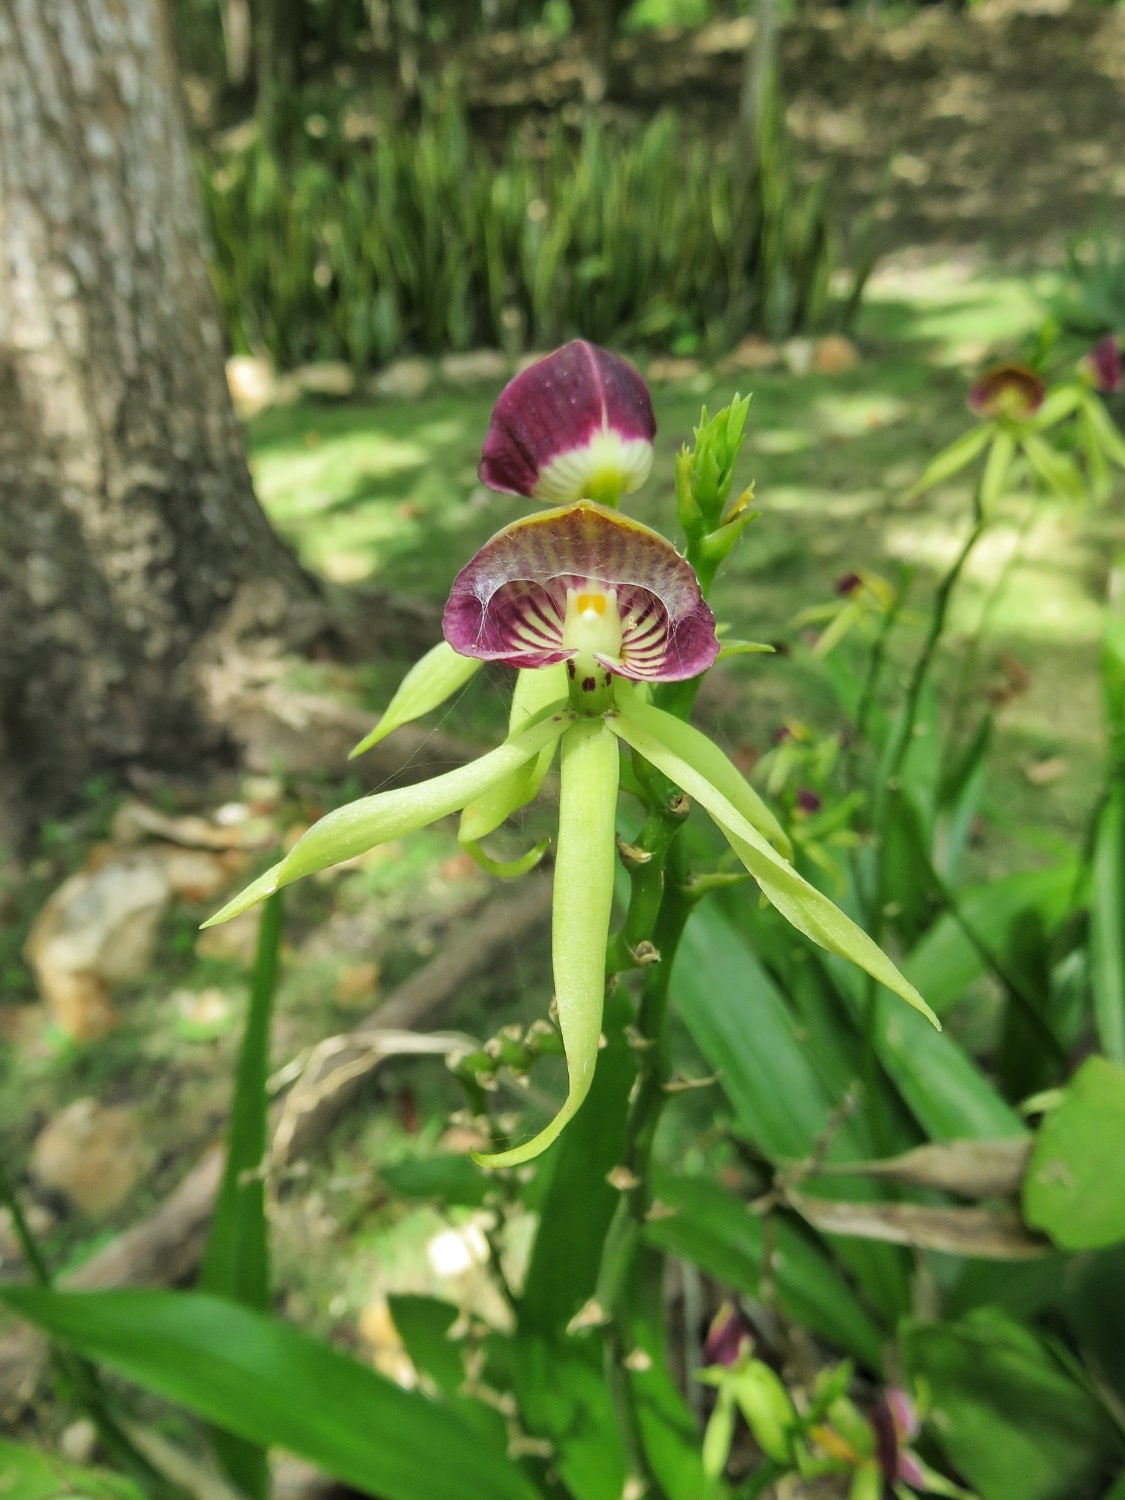 Belize's National Flower, the black orchid, at Lamanai